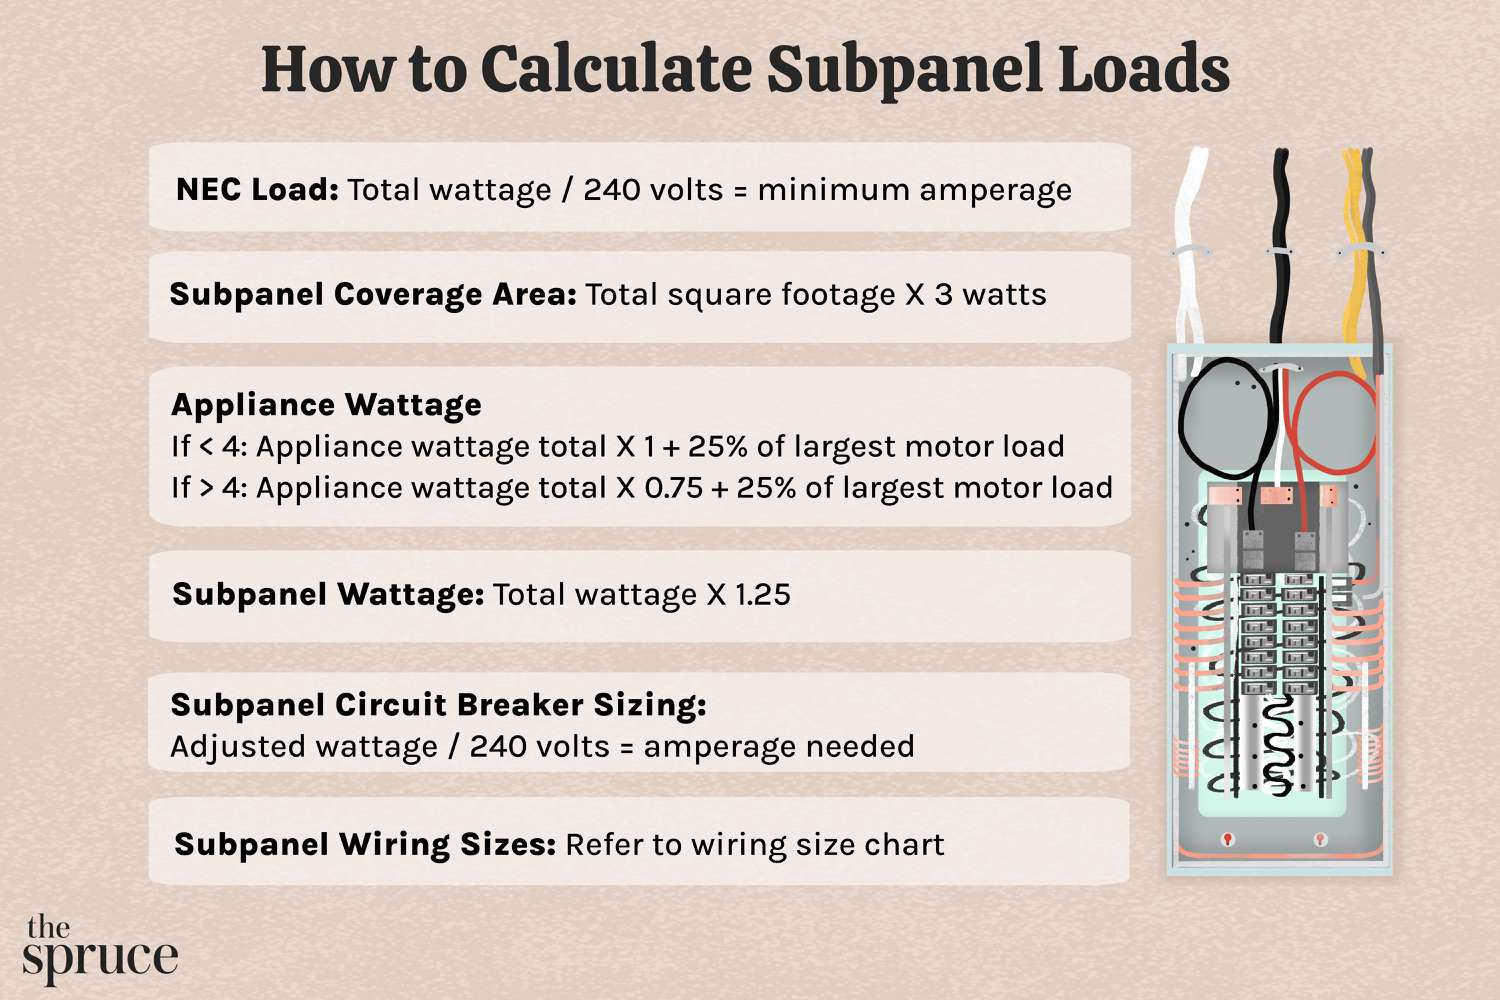 How to Calculate Subpanel Loads